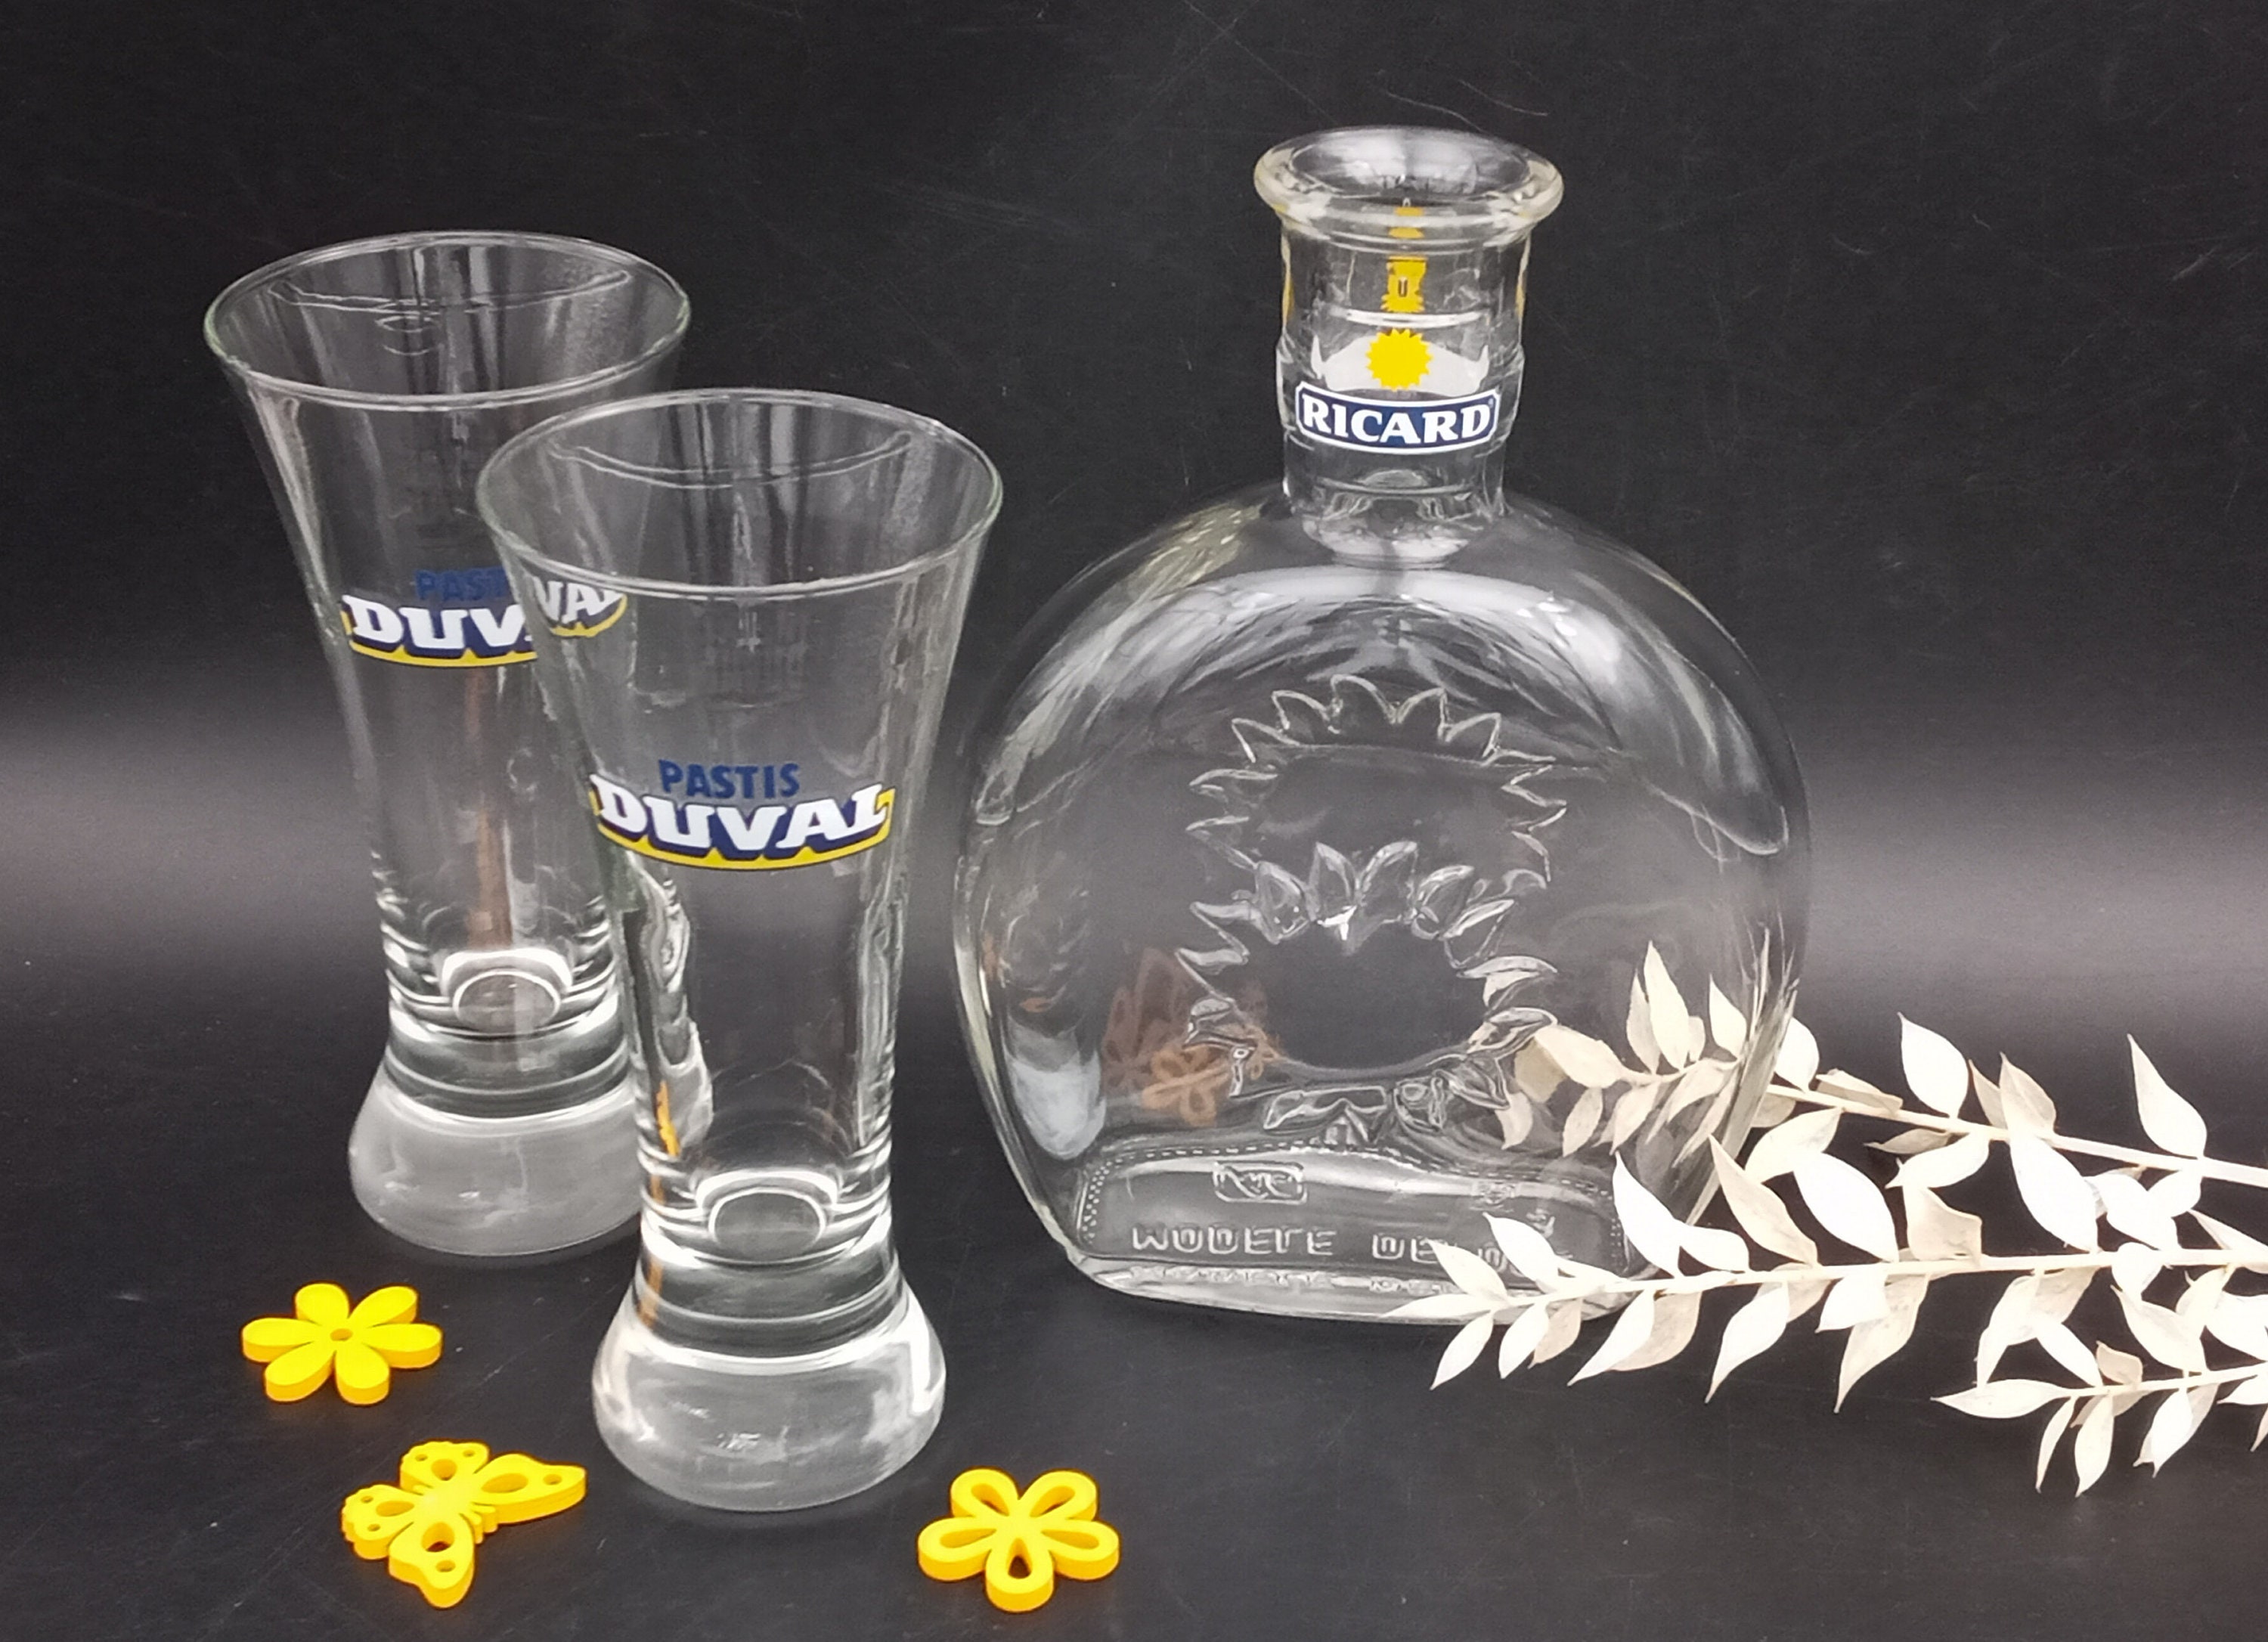 Set of 3 RICARD Carafe Pieces and 2 DUVAL Glasses -  Sweden